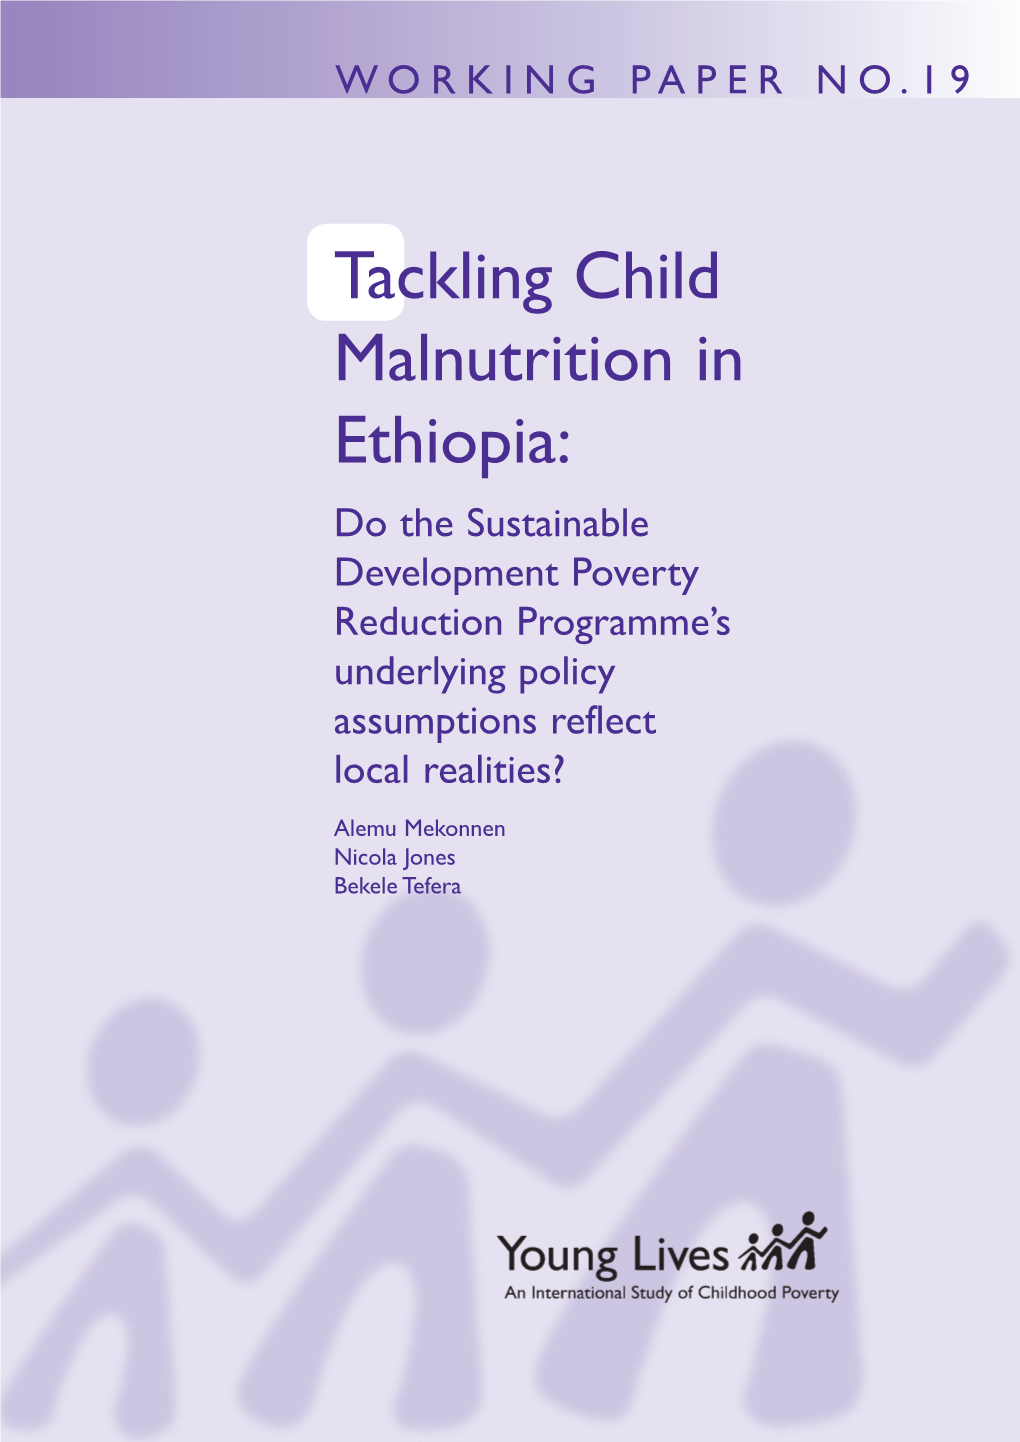 Tackling Child Malnutrition in Ethiopia: Do the Sustainable Development Poverty Reduction Programme’S Underlying Policy Assumptions Reflect Local Realities?